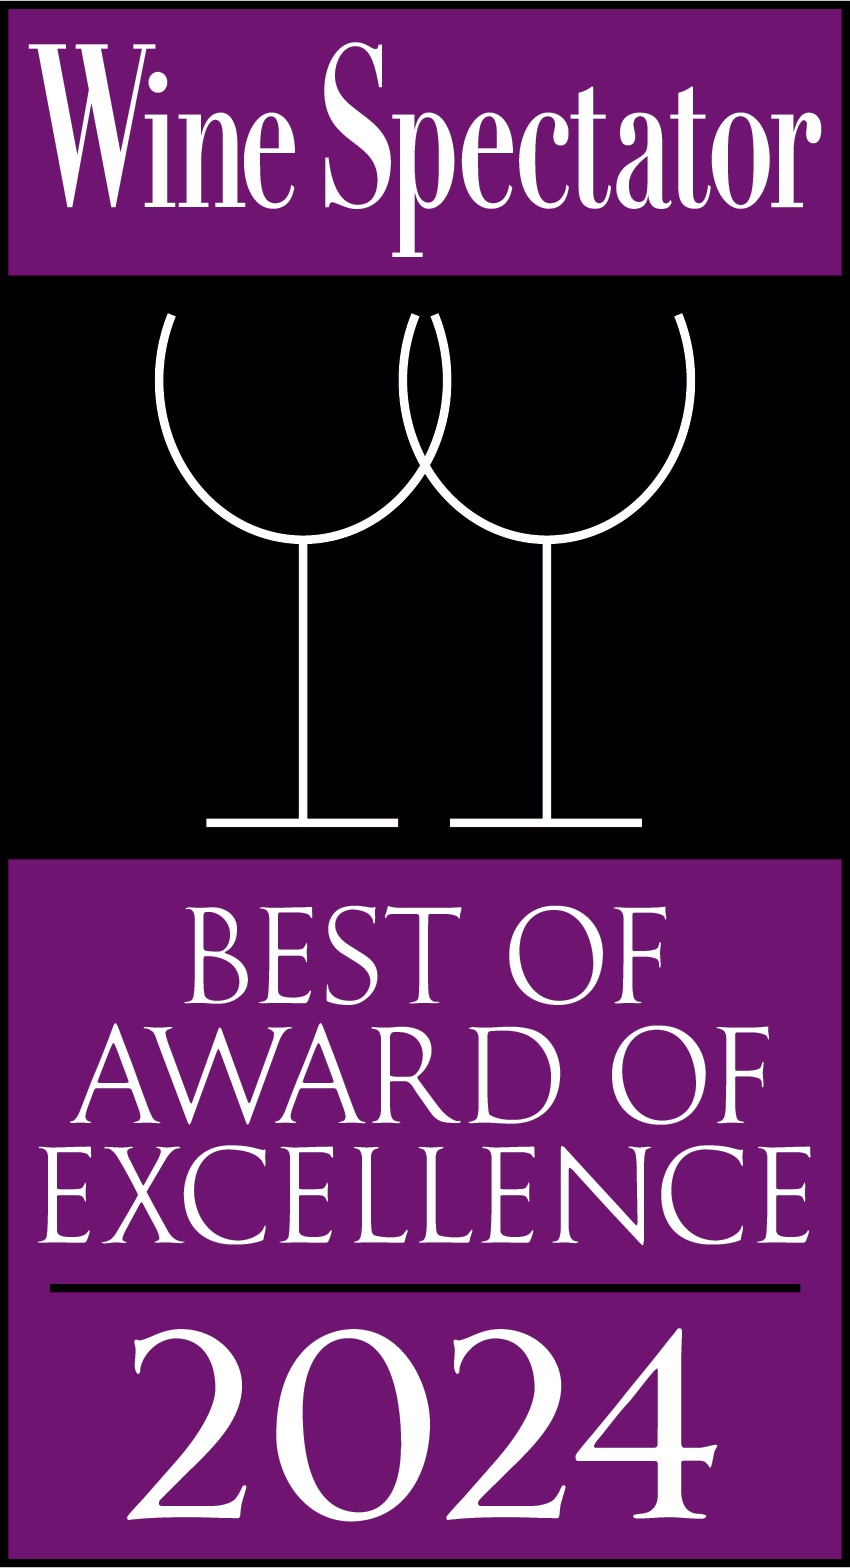 Wine Spectator 2024 - Best of Award of Excellence